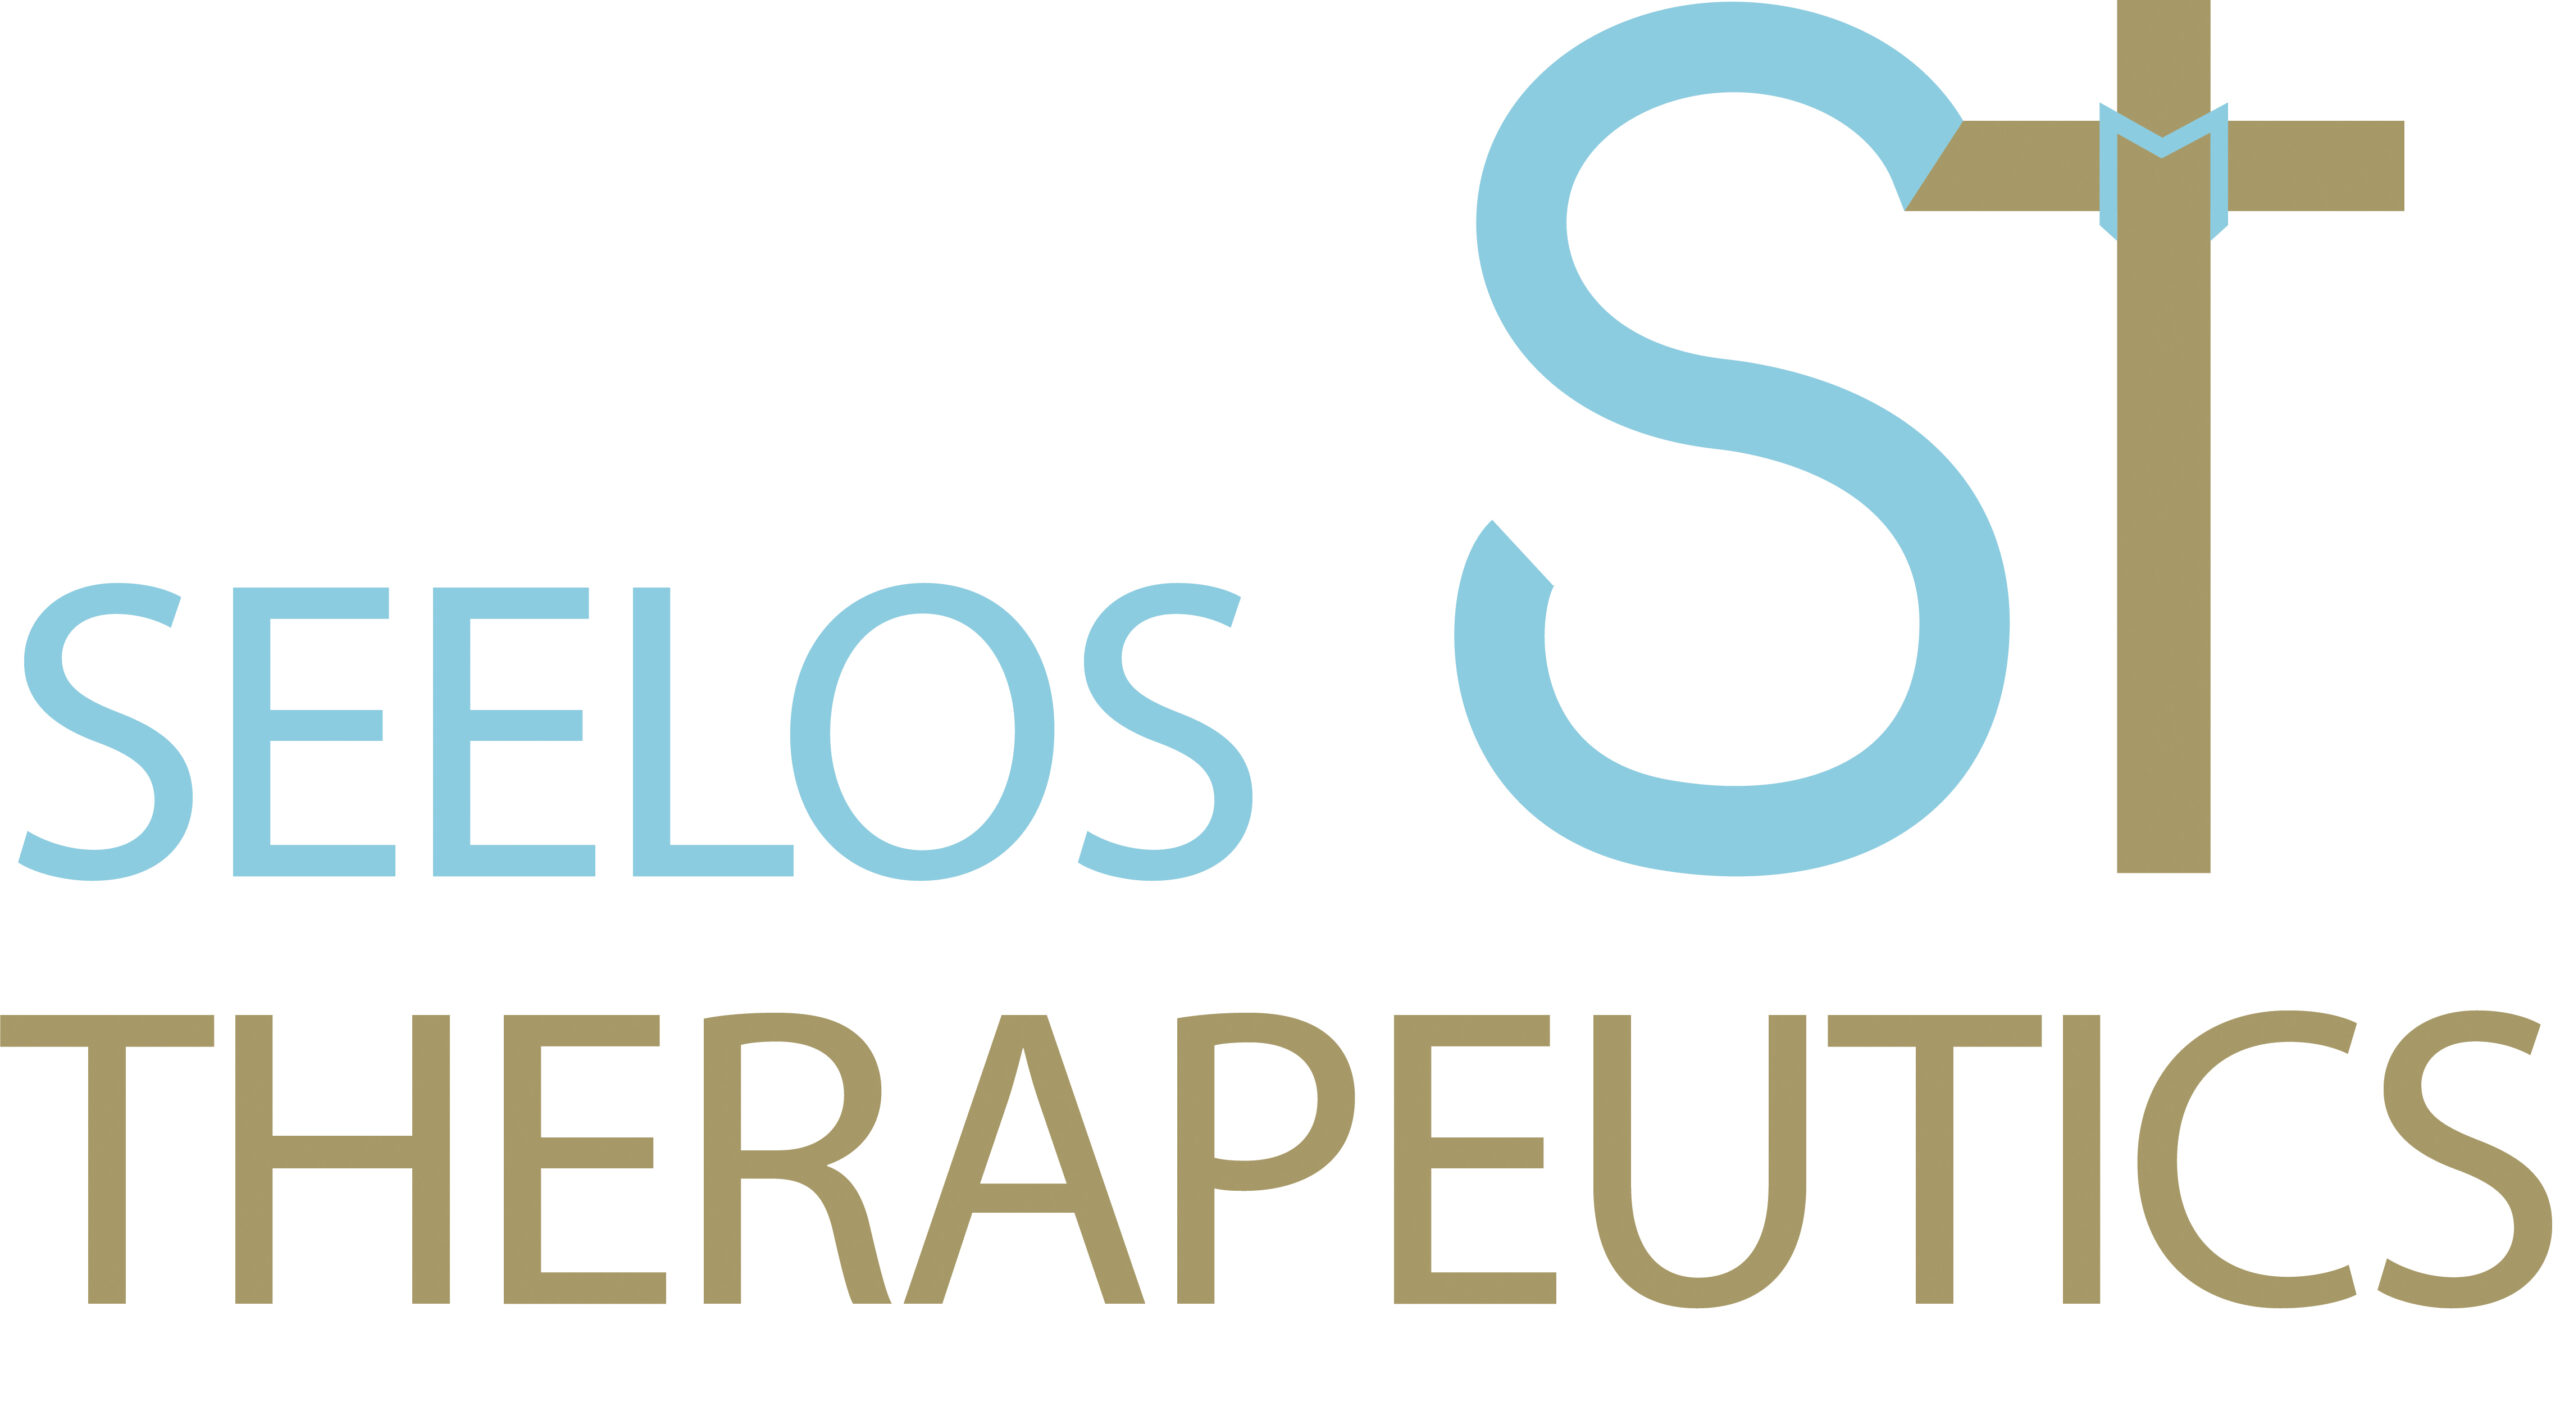 Seelos_full-logo-and-icon-color_2-scaled.jpg